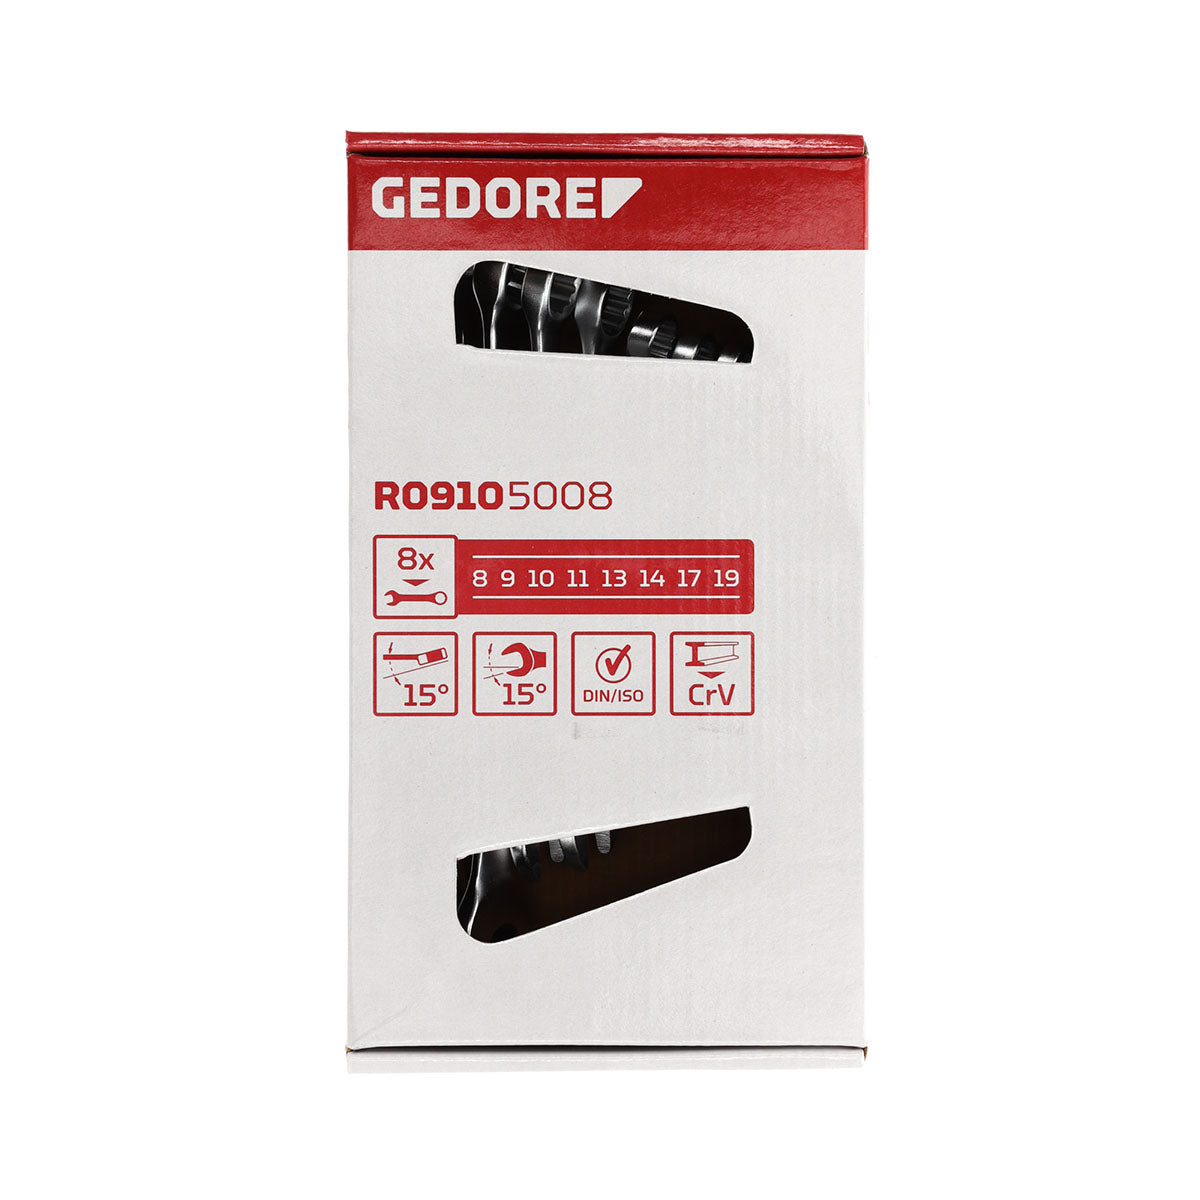 GEDORE red R09105008 - Combination wrench set, 8-19 mm, 8 pieces (3300988)